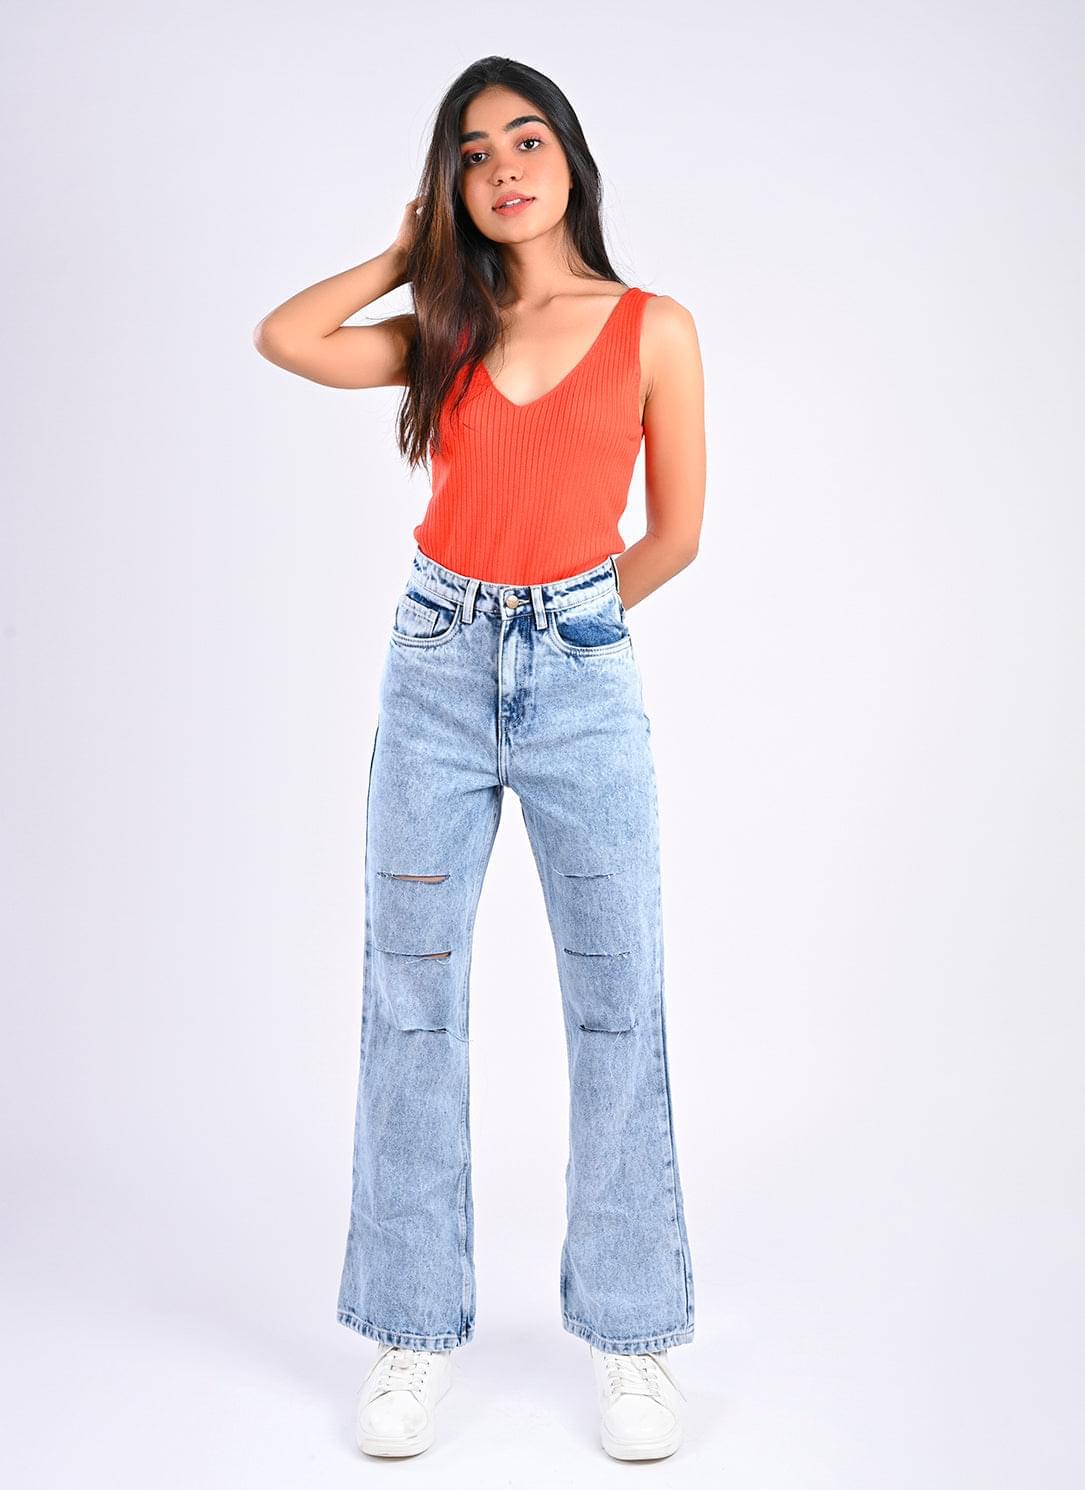 90's Ripped ice blue bootcut jeans